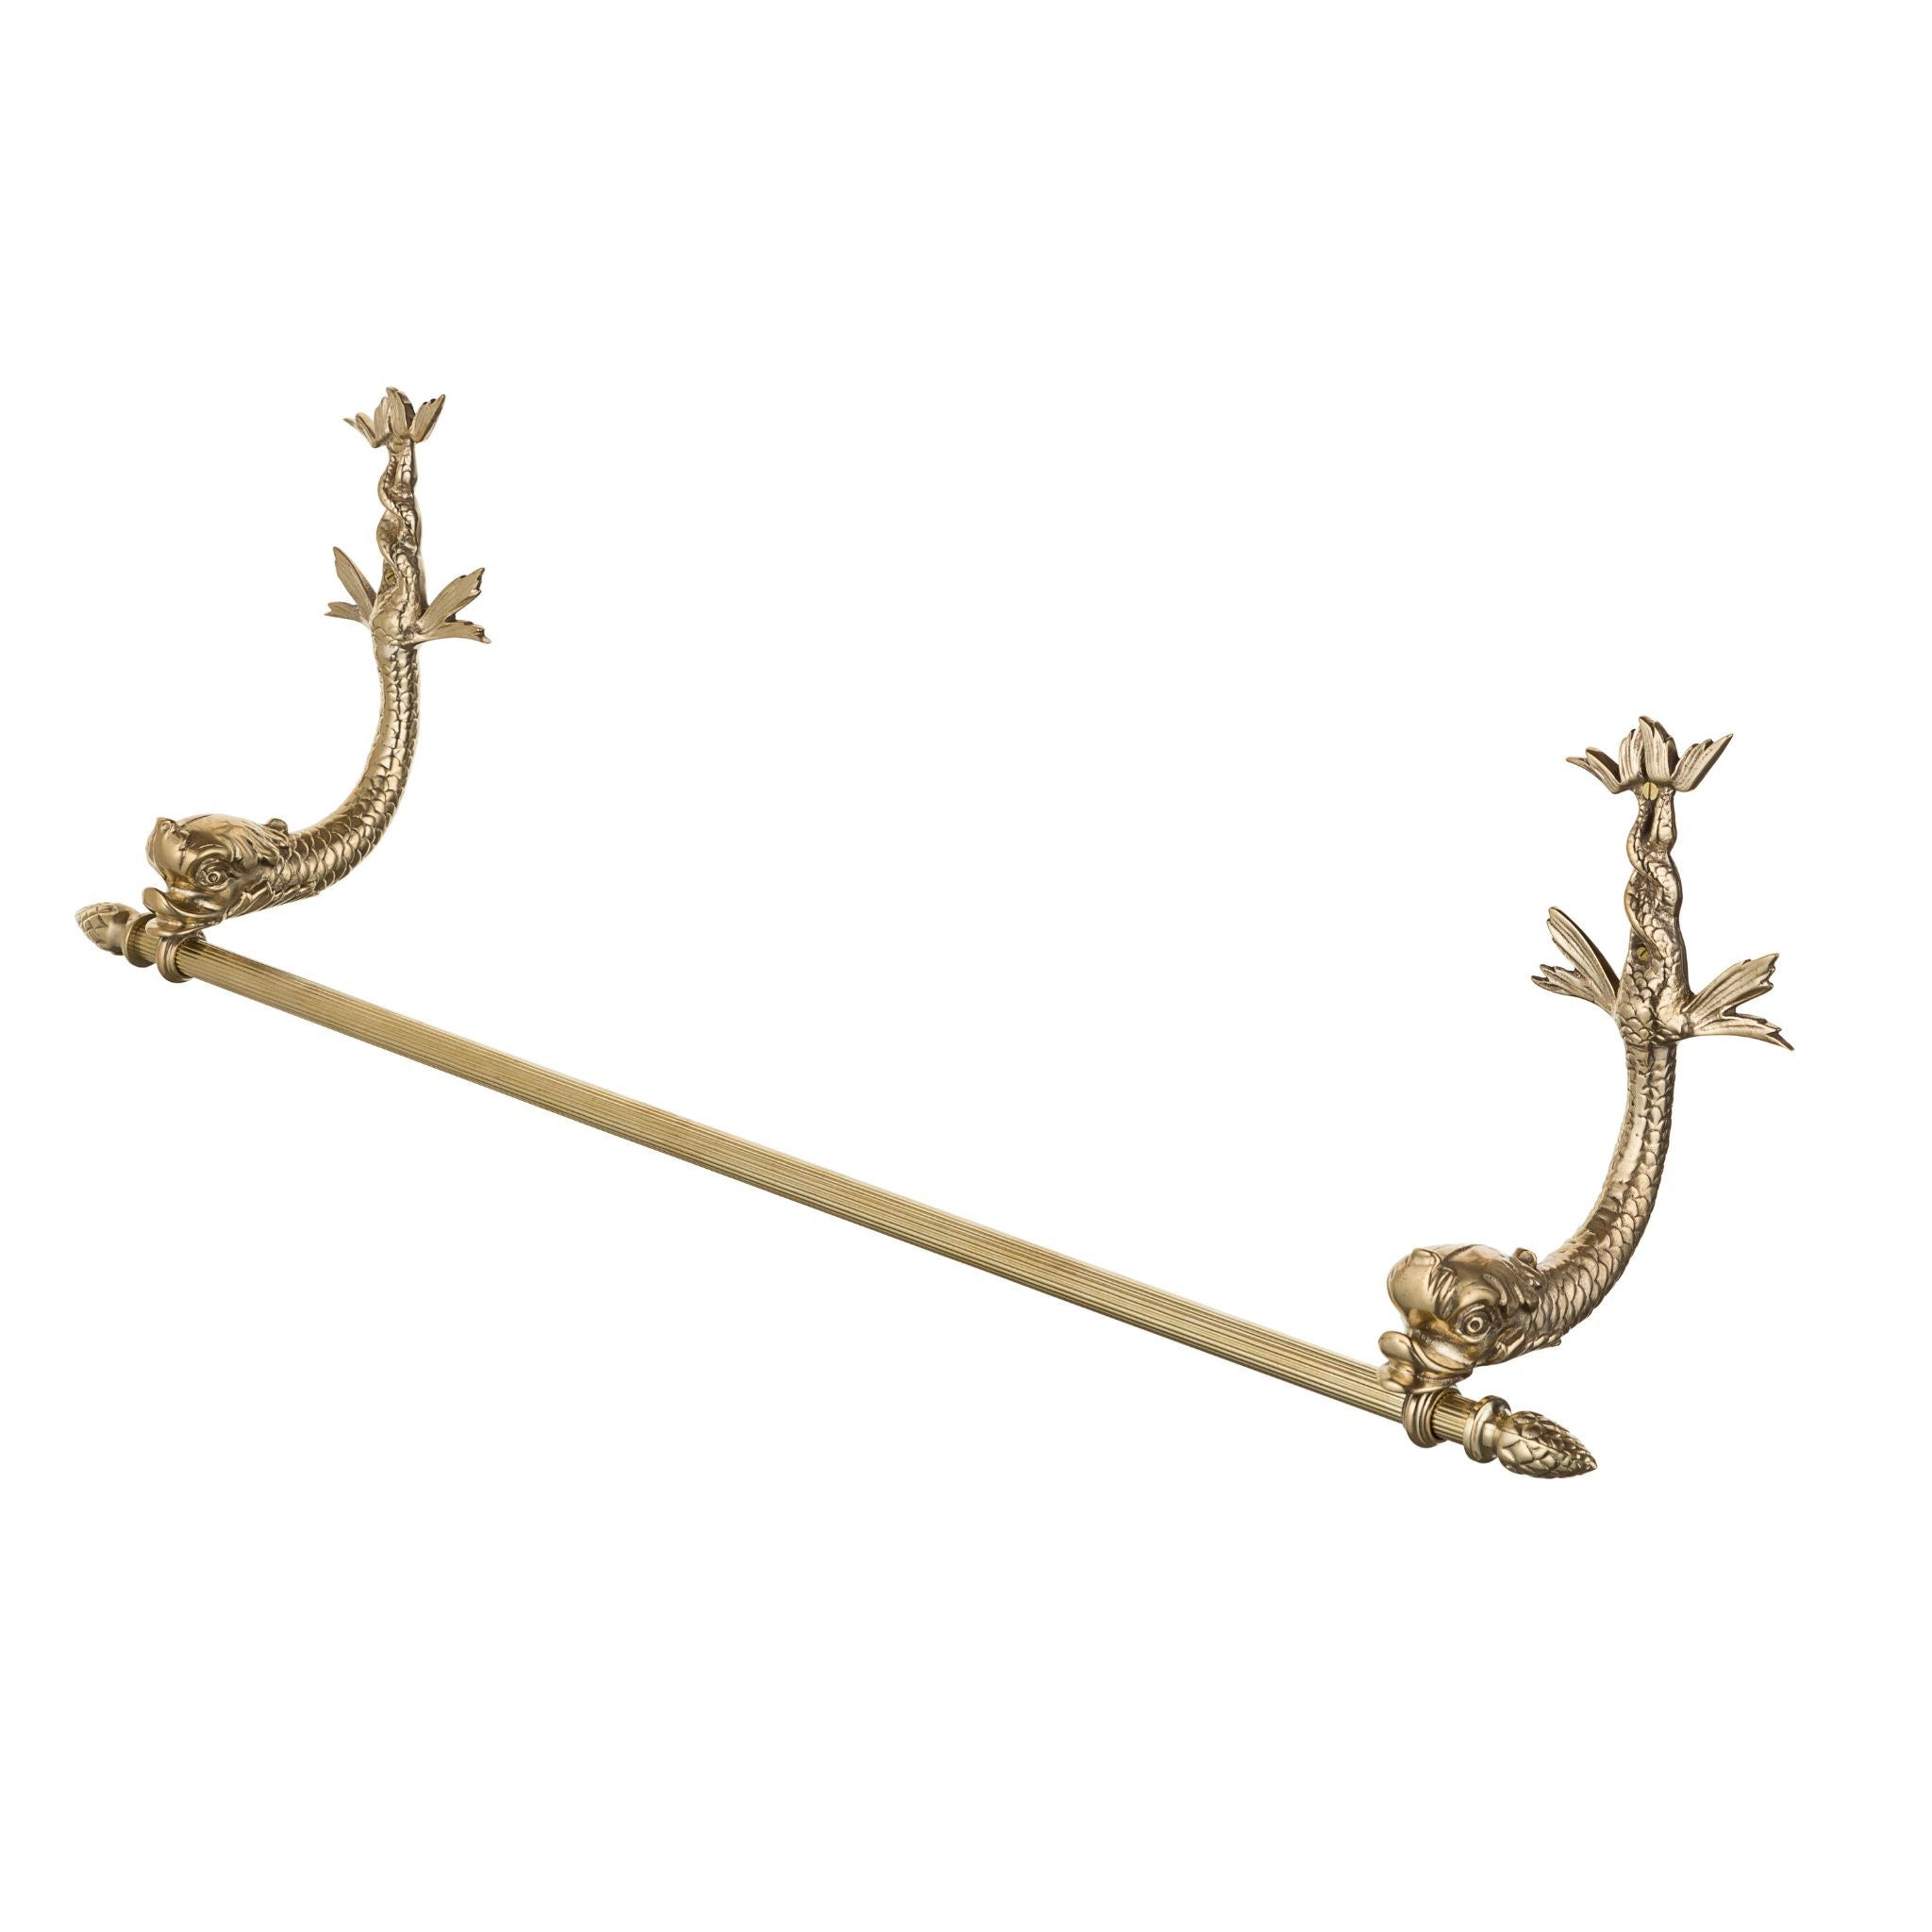 Zante brass towel holder with dolphins - ilbronzetto